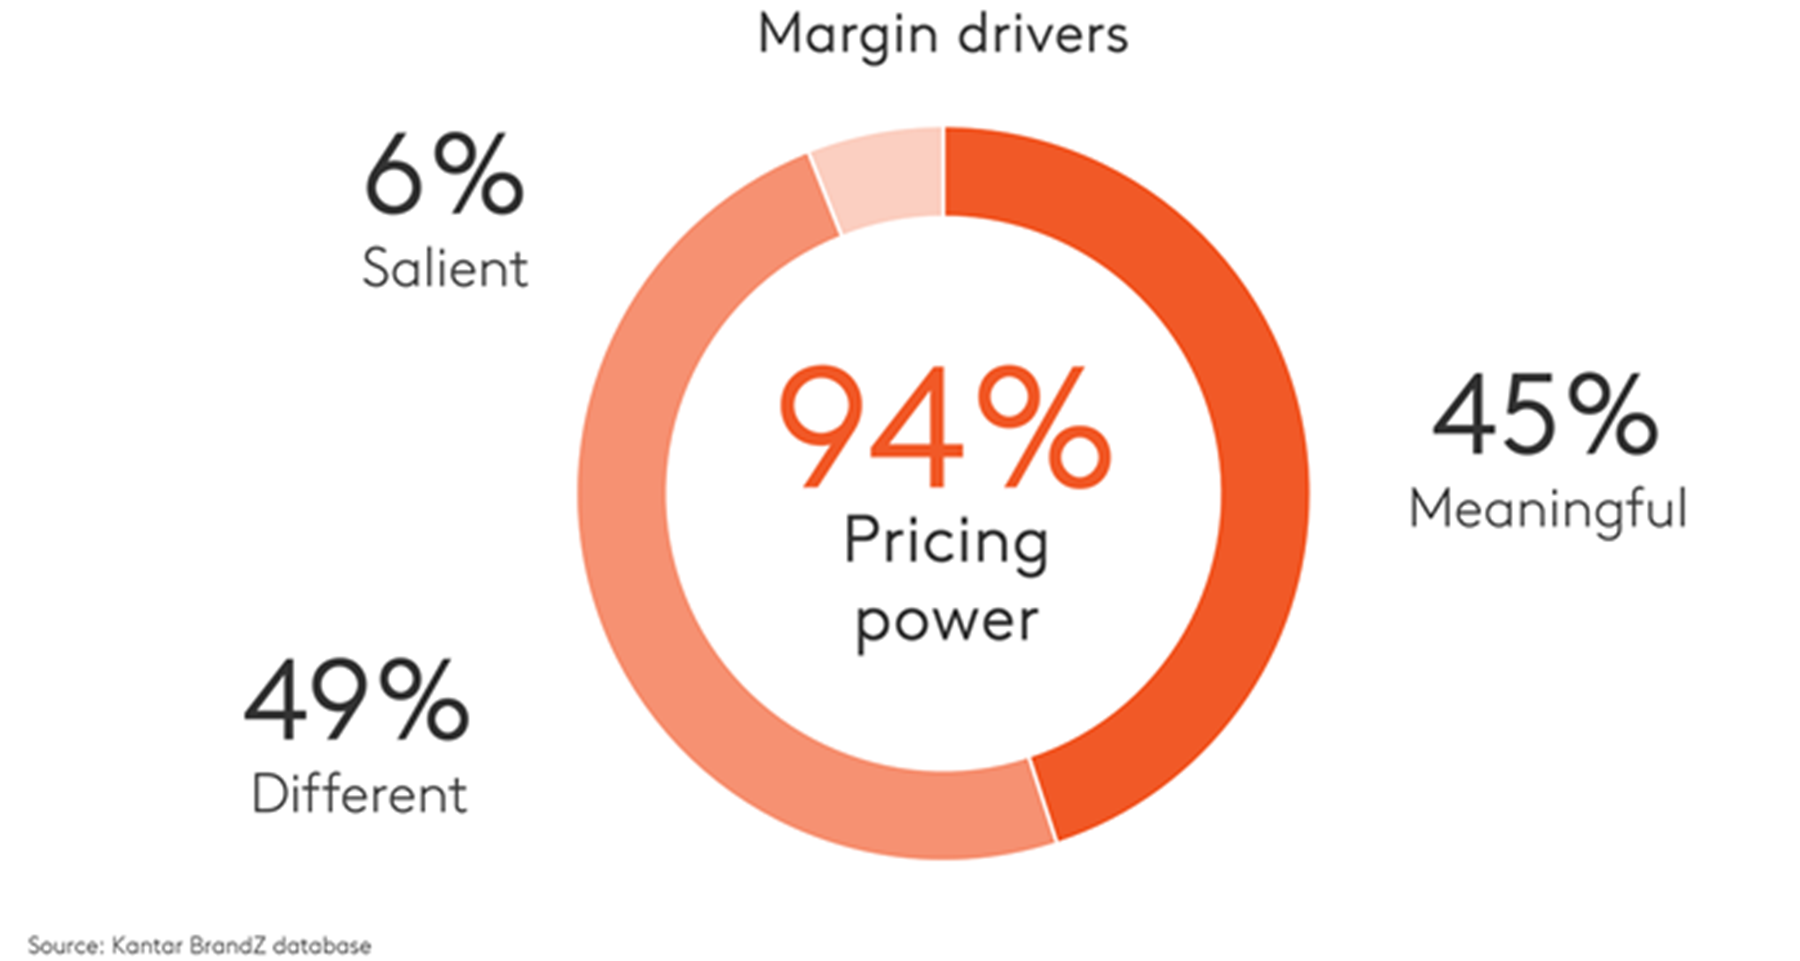 Pricing power = 45% meaningful, 49% different, 6% salient